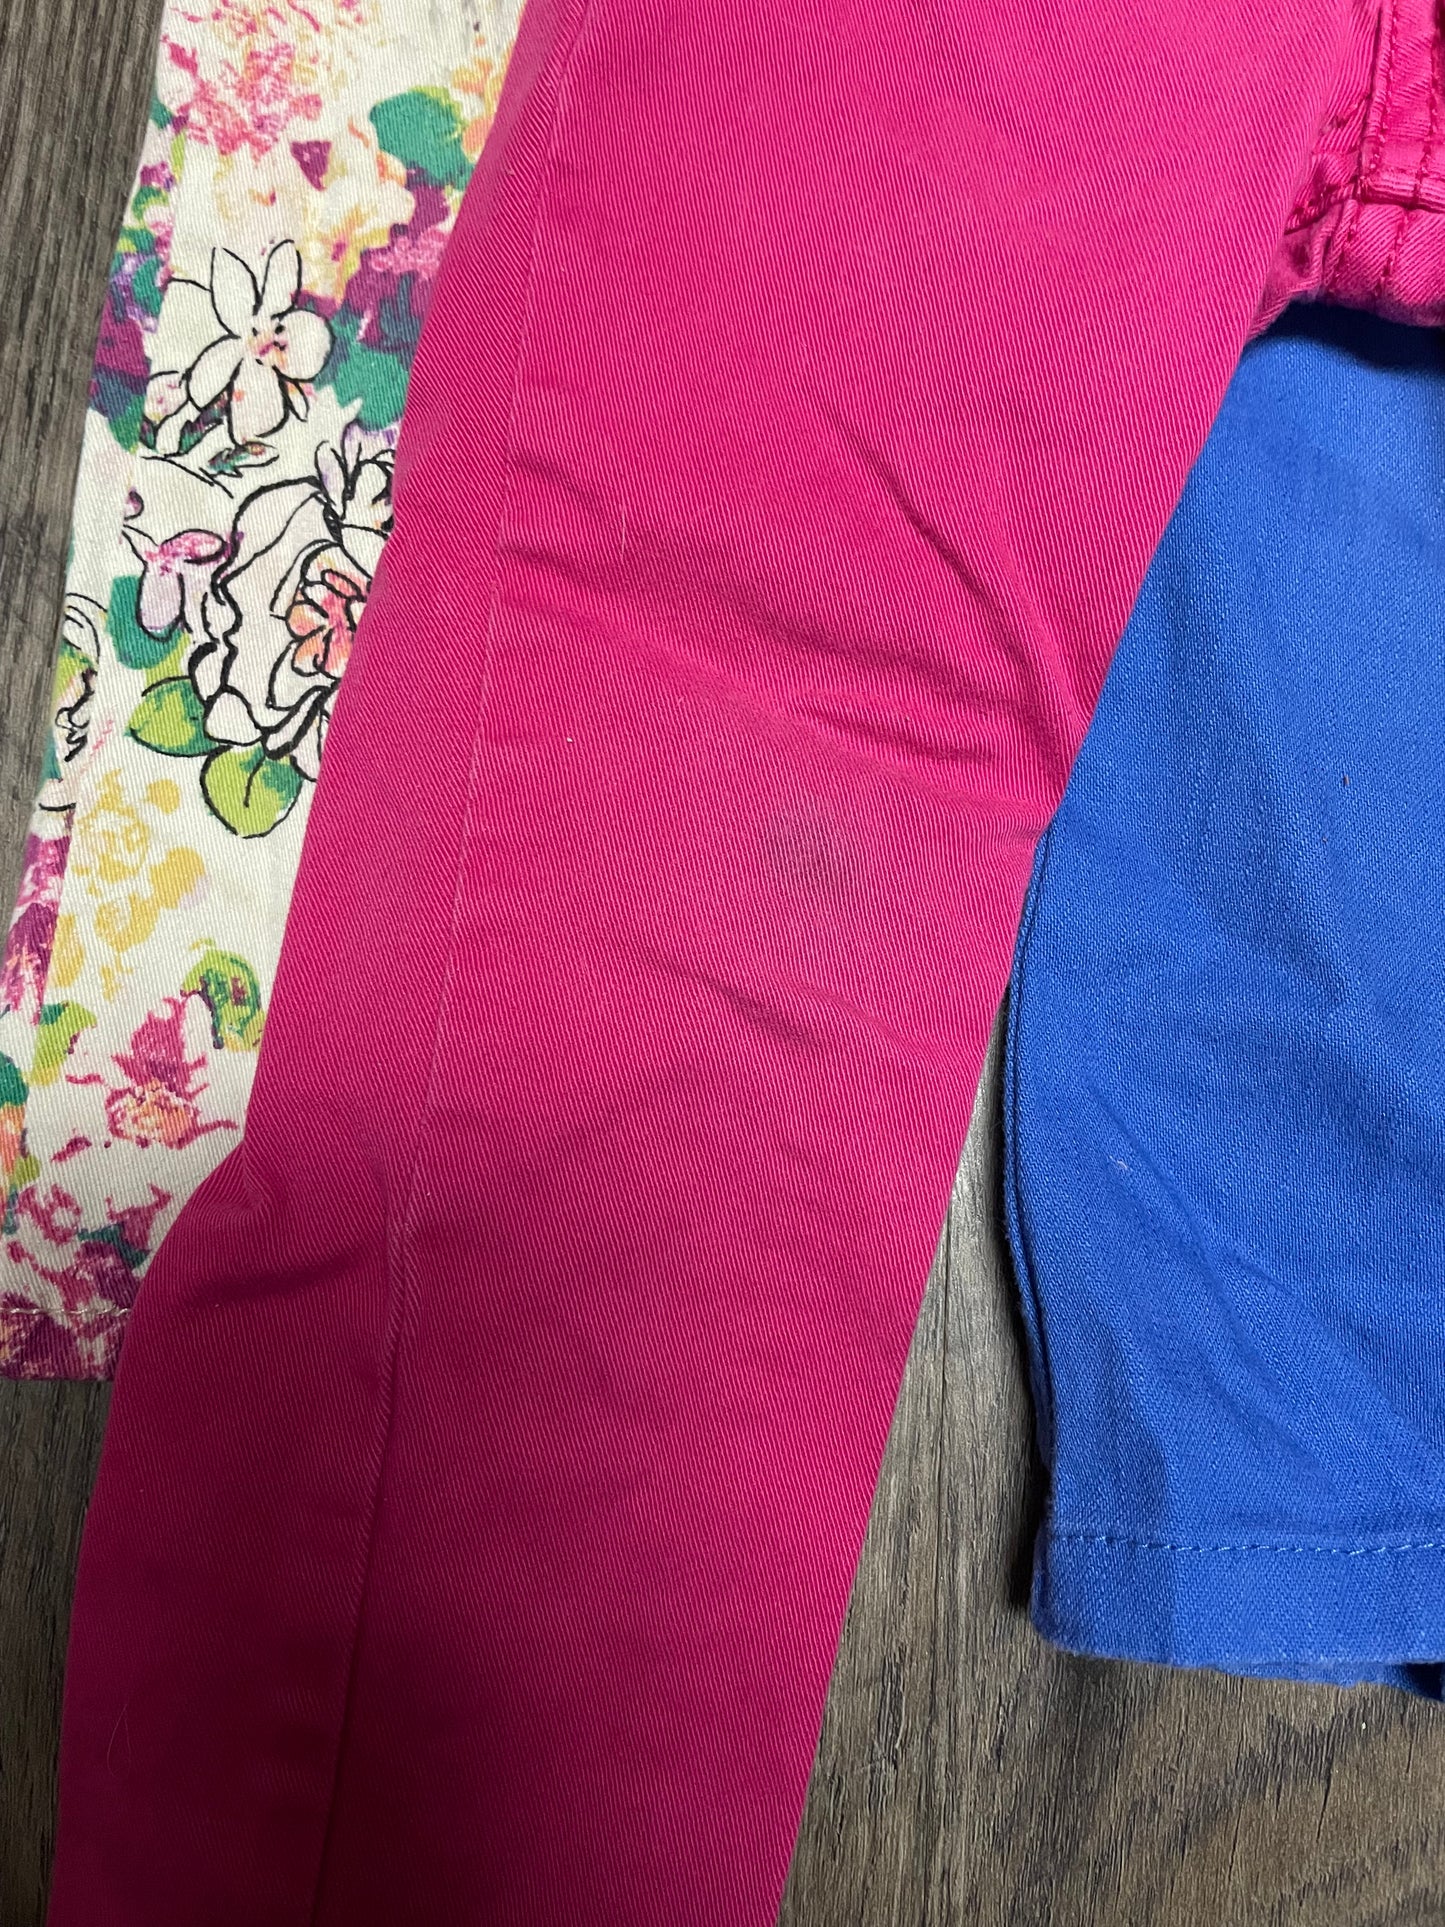 Toddler Girl 2T pants bundle. GUC. Some stains.